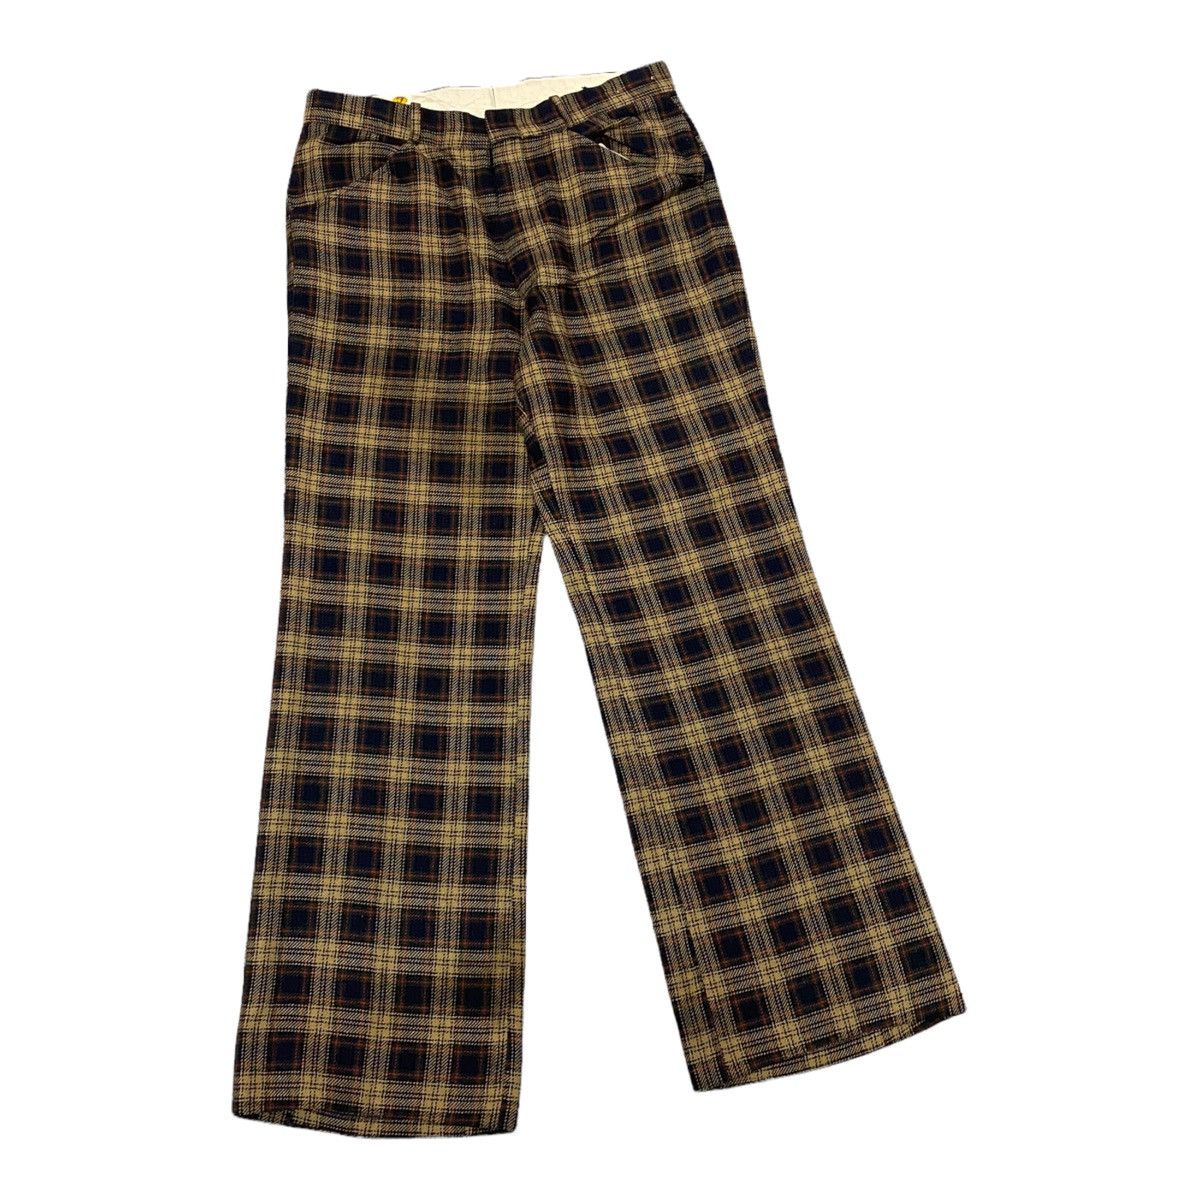 Archival Clothing - 🔥FARAH AW1998 CHECKED PLAID WOOL PANTS MADE IN ITALY - 3